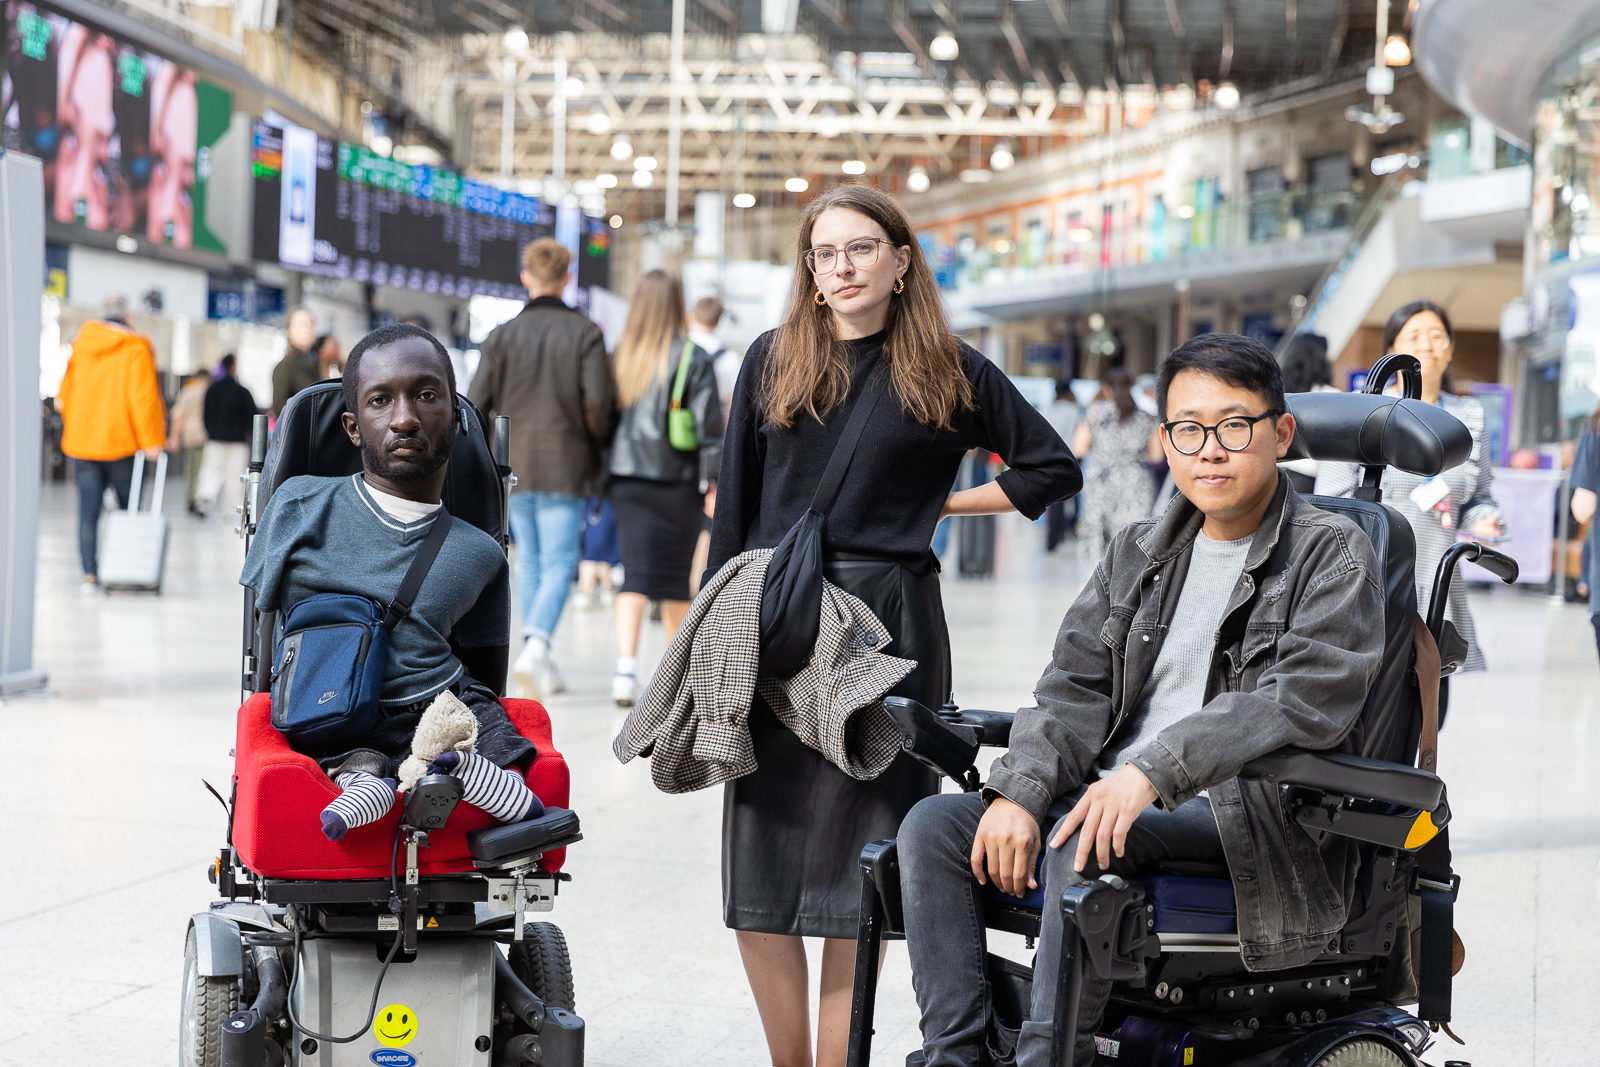 Three disabled people in a train station looking defiantly into the camera. On the left is a black man with upper and lower limb differences who uses an electric wheelchair. He has short brown hair and a beard, and is wearing a blue t-shirt and bag. In the middle is a white woman standing with her arm on her hip. She has brown hair, wears glasses, and a black jumper. On the right is an Asian man who uses an electric wheelchair. He has dark hair, and wears glasses, a grey denim jacket, and jeans.